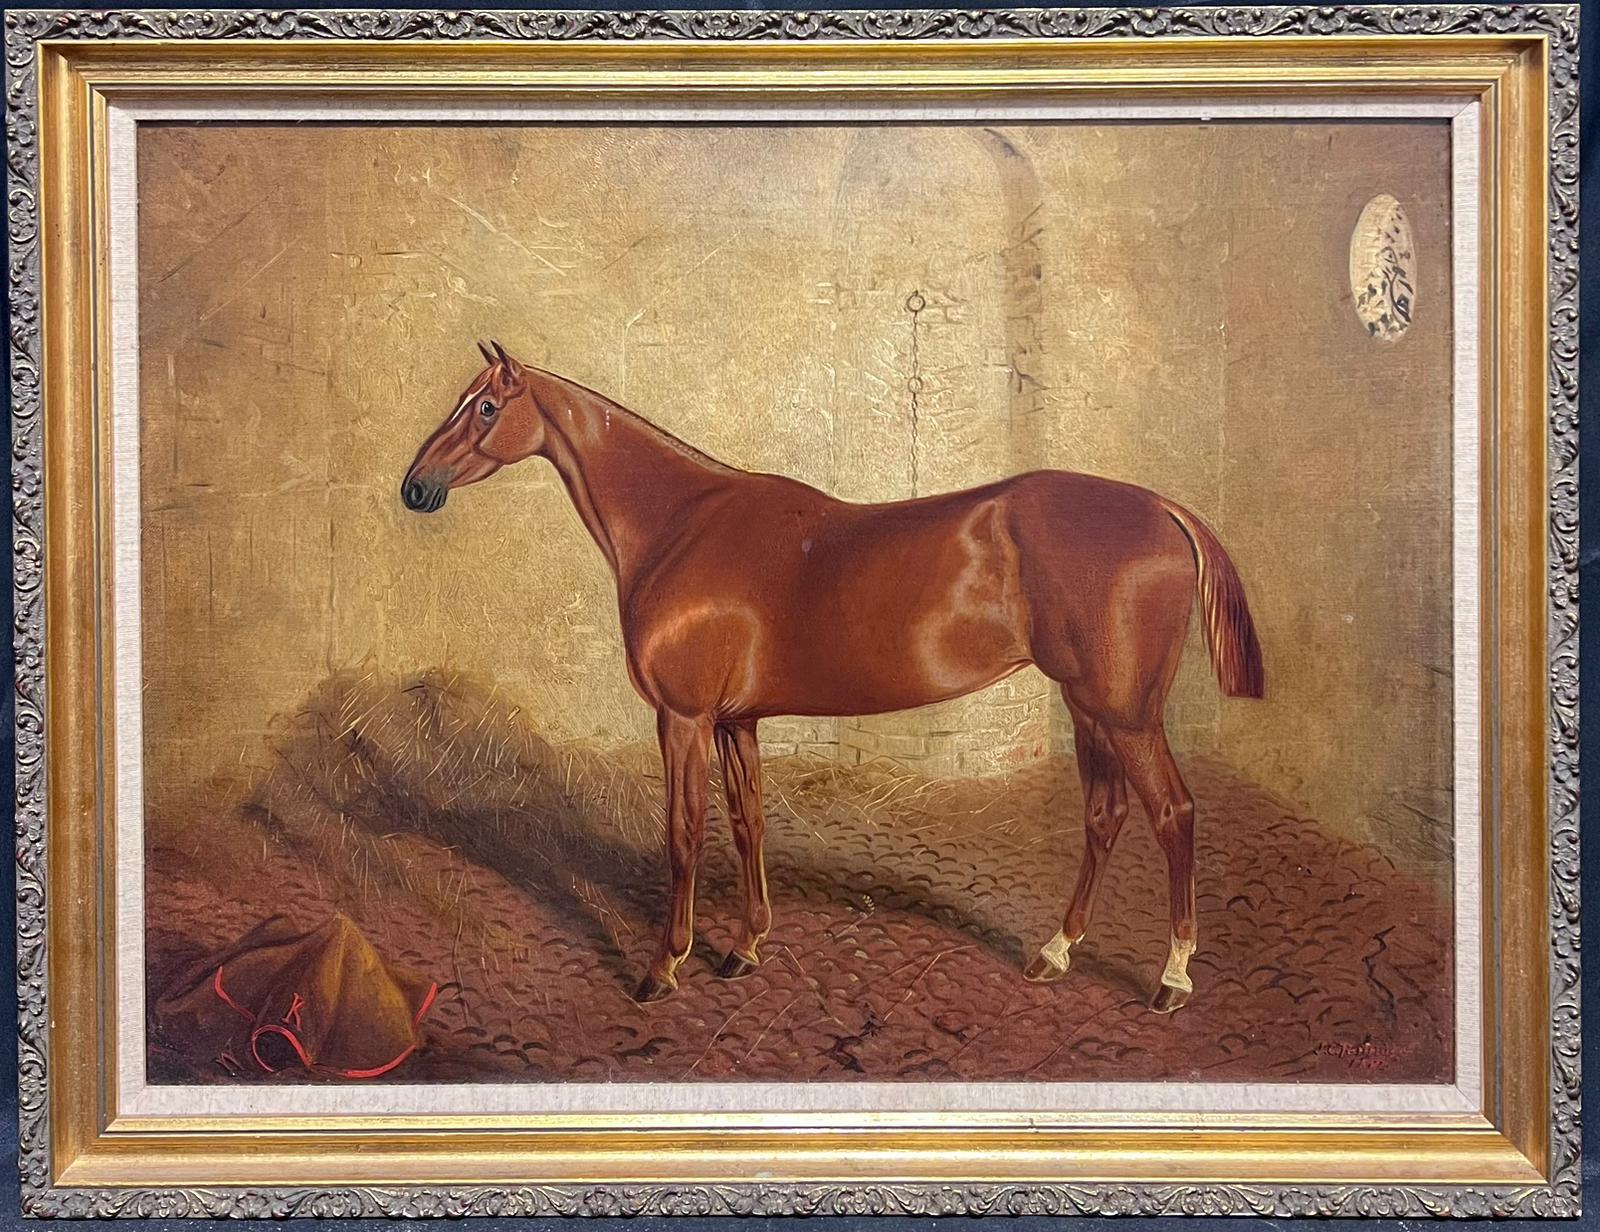 Fine 19th Century British Sporting Art Oil Painting Horse in Stable Interior For Sale 1